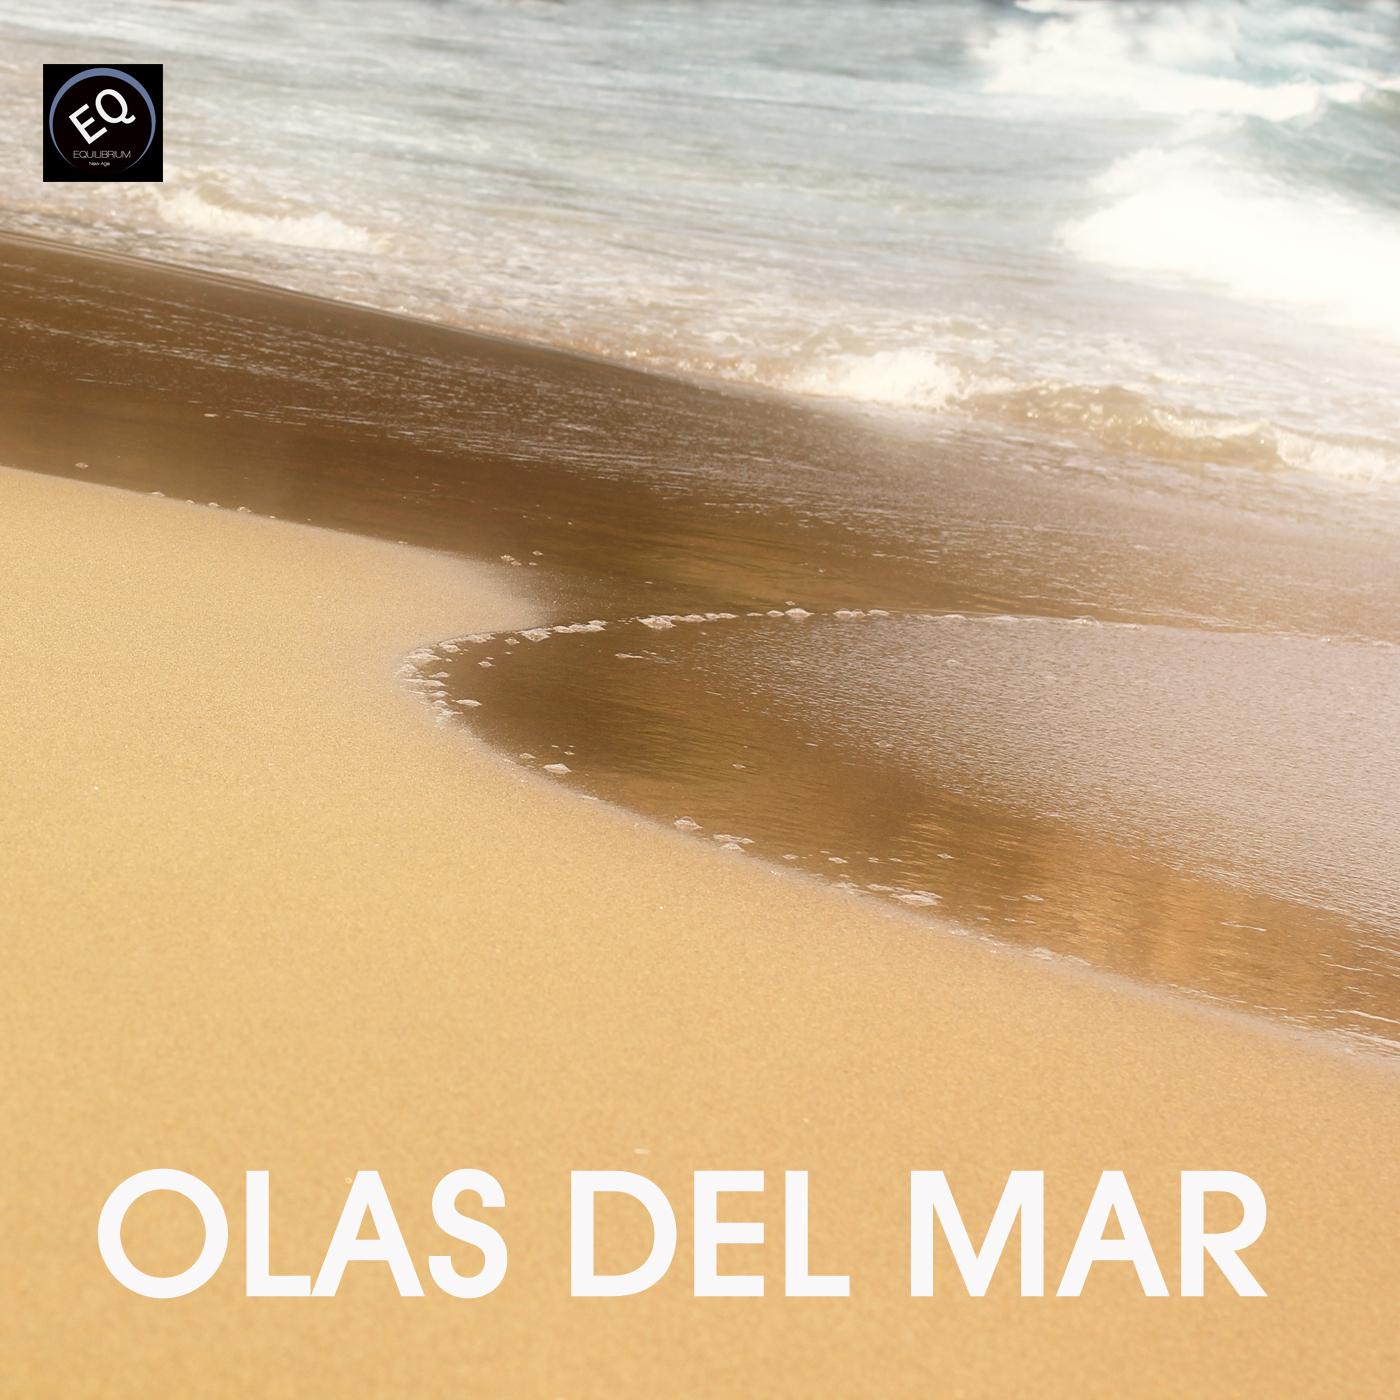 Ocean Waves 1 - Relaxing Ocean Wave for Relaxation, Meditation and Sound Therapy Musica para dormir profundamente